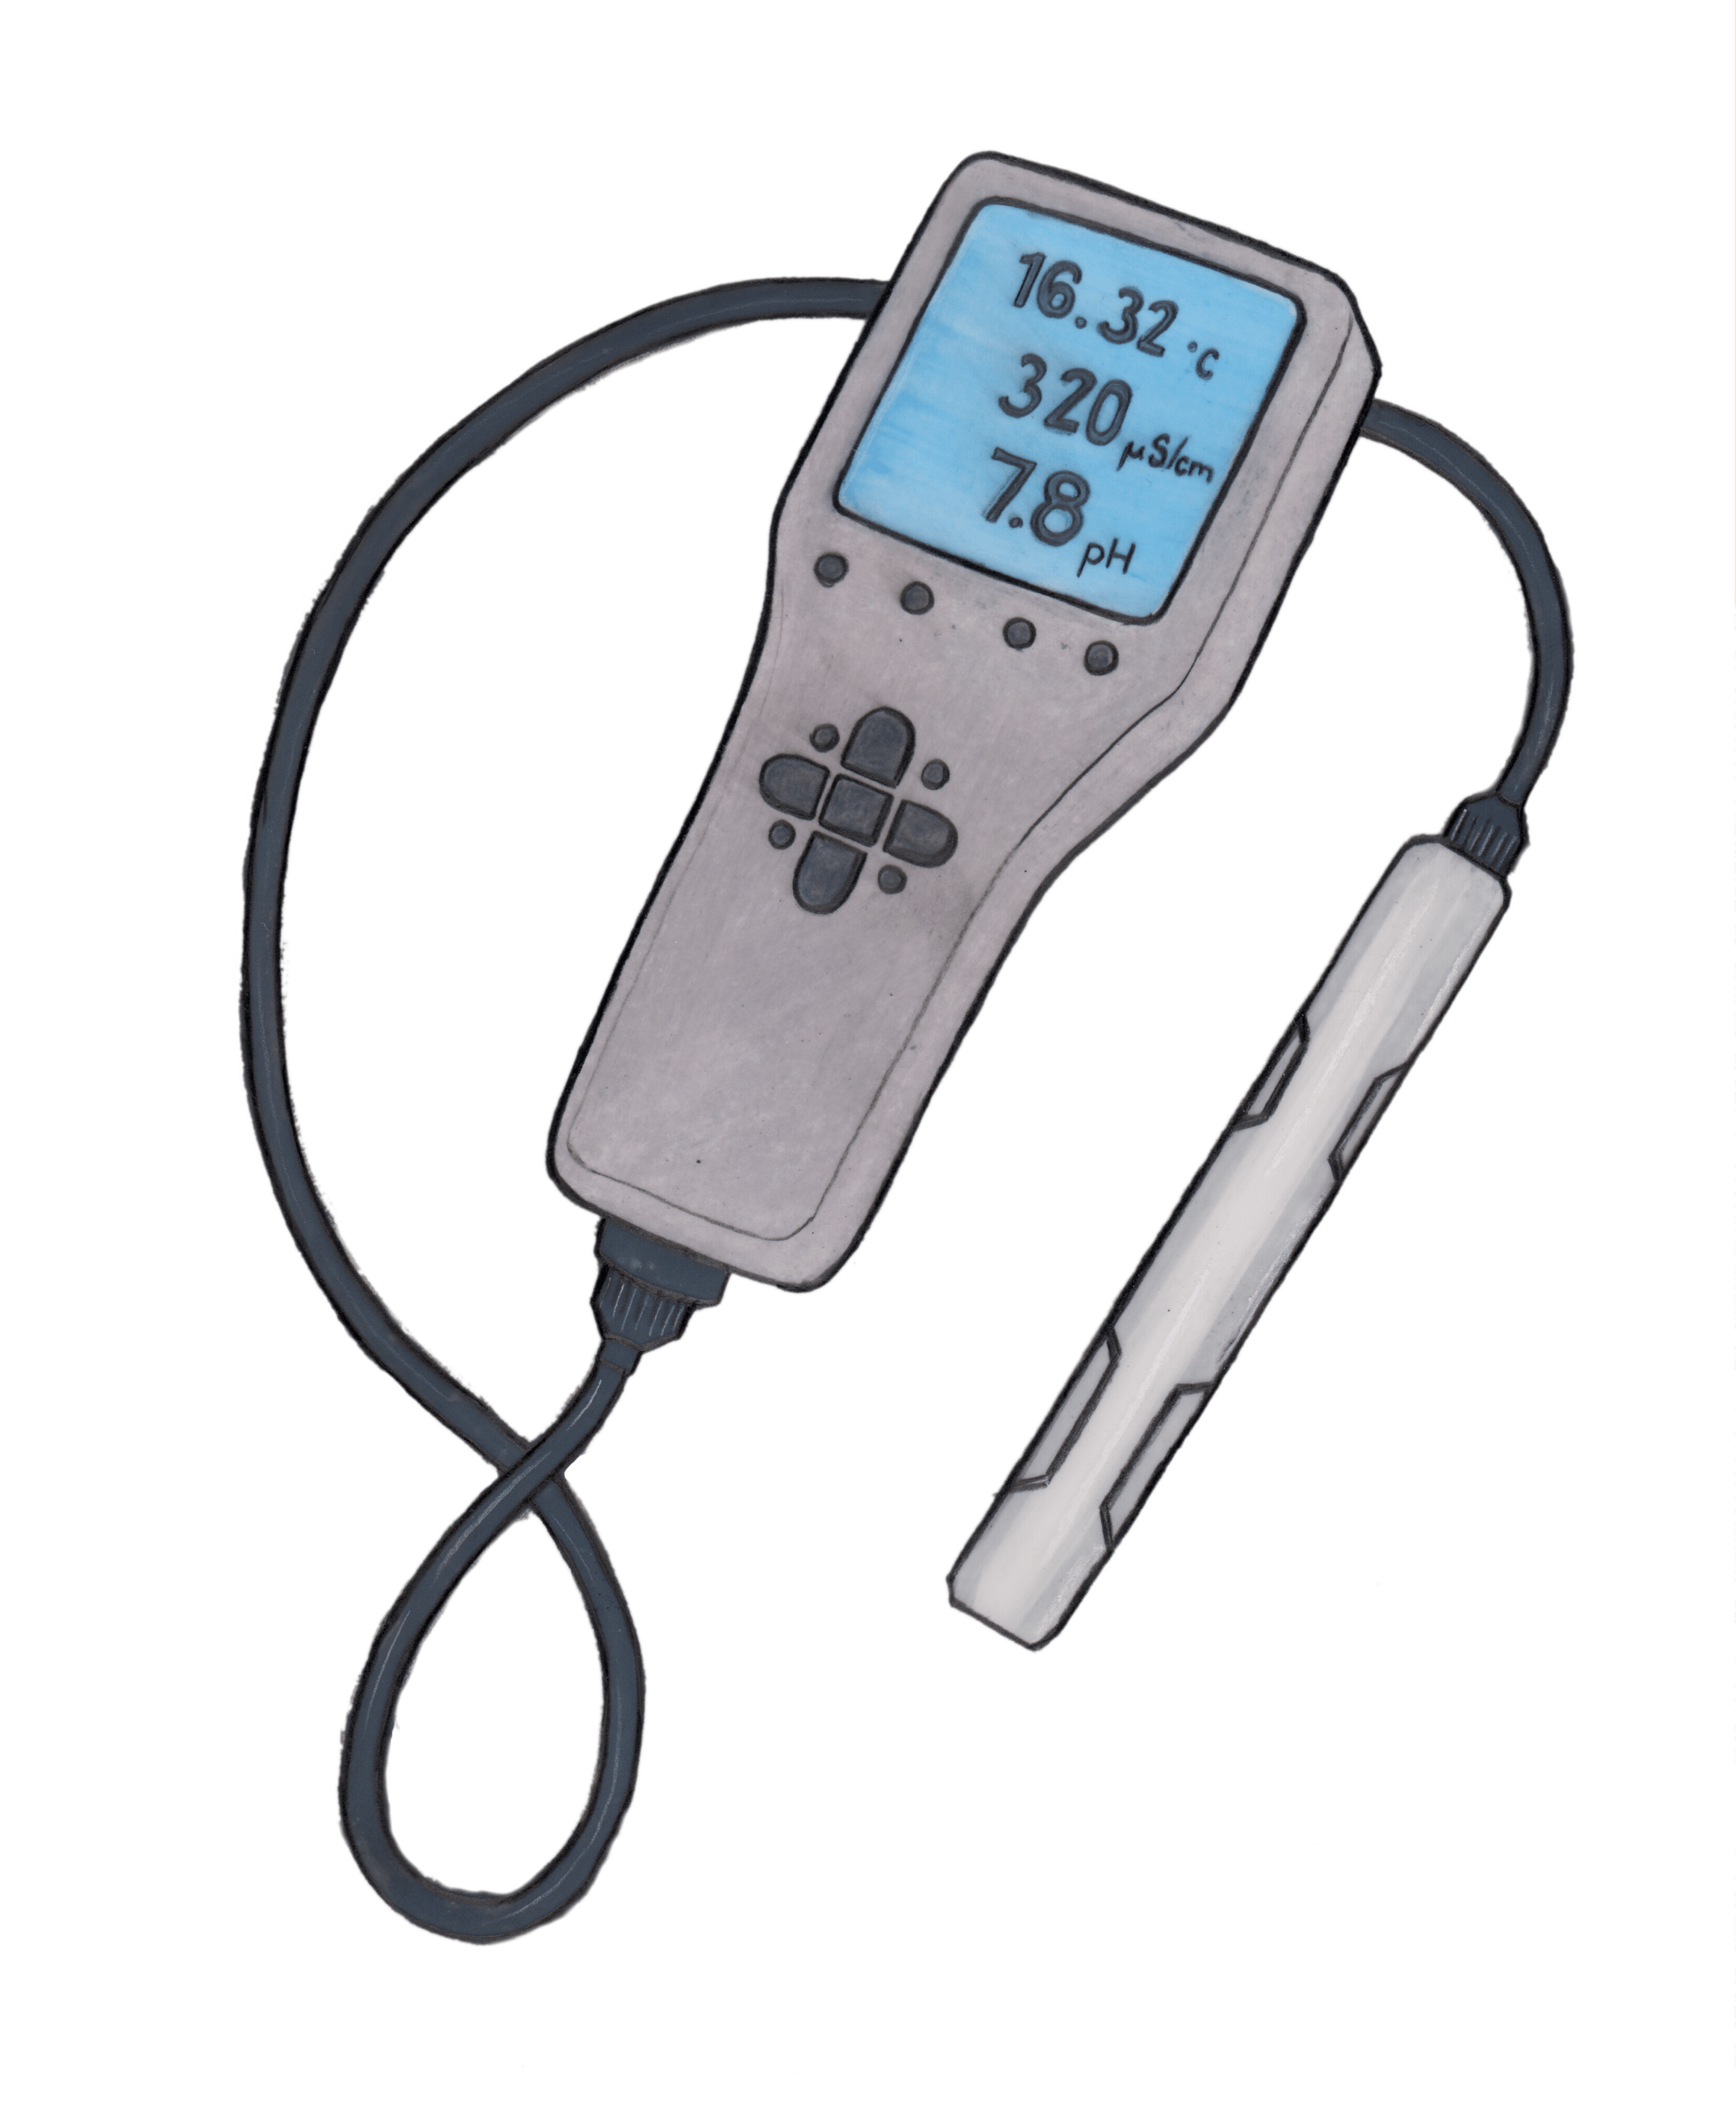 Drawing of a handheld device with probe. 